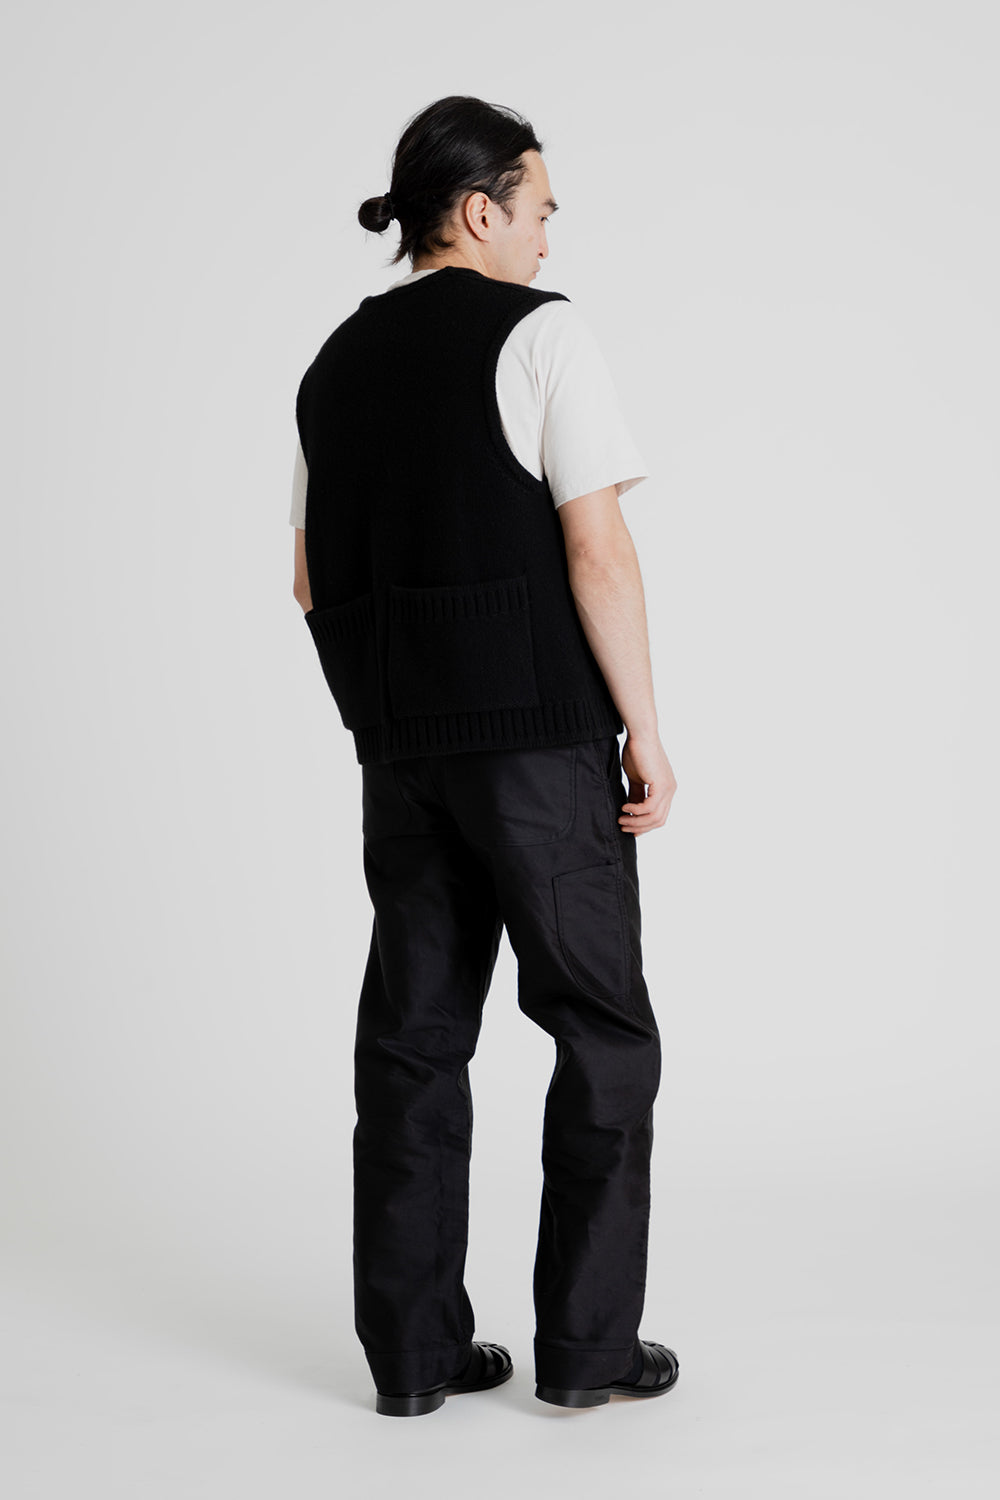 And Austin Wool Cashmere Utility Vest in Black